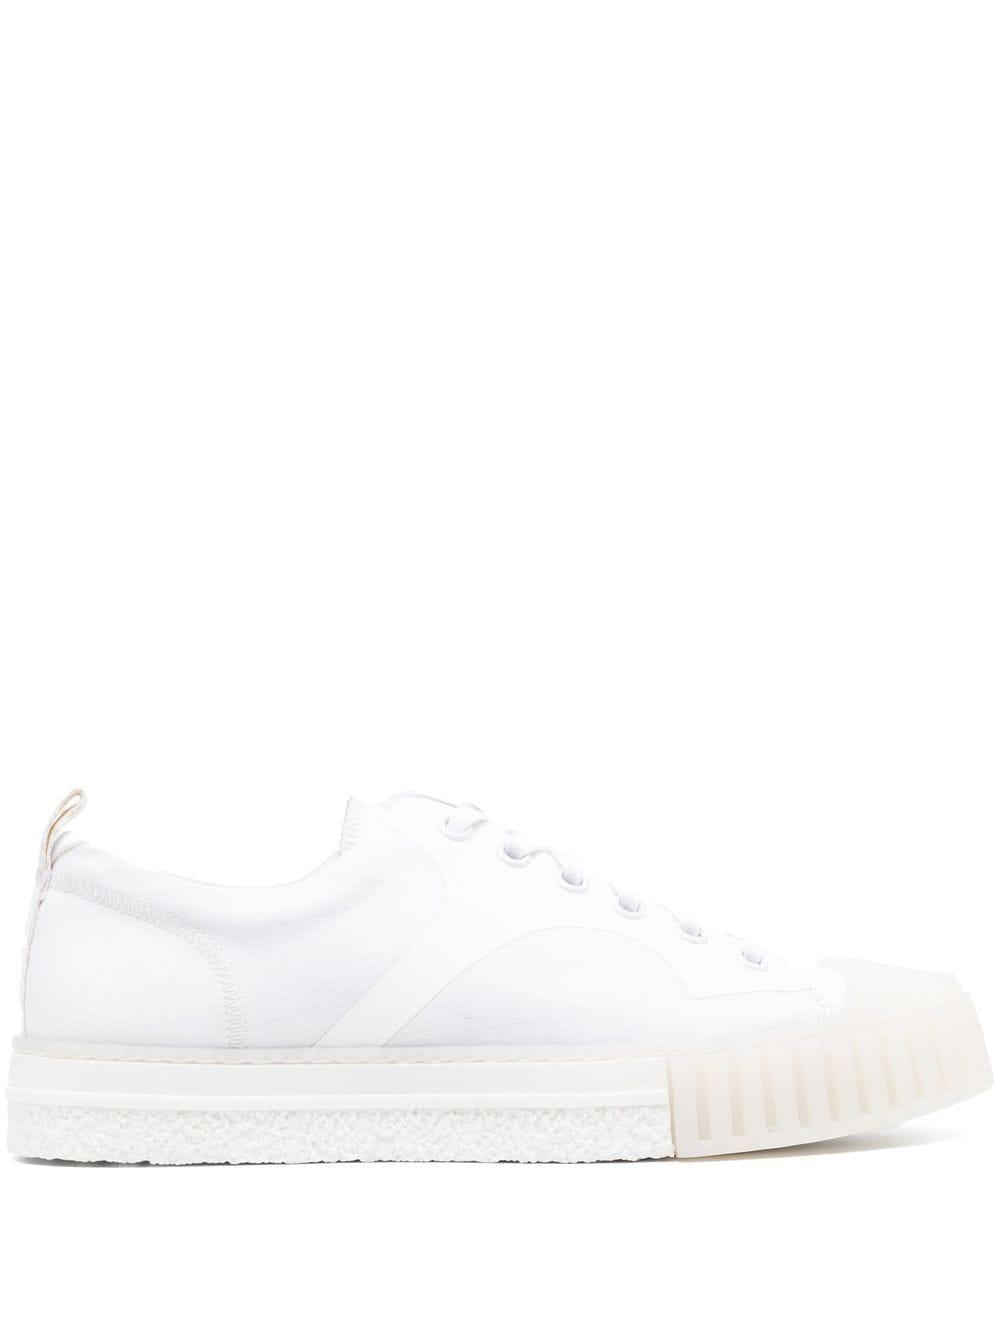 Adieu Type Two Mask Sneakers in White for Men | Lyst